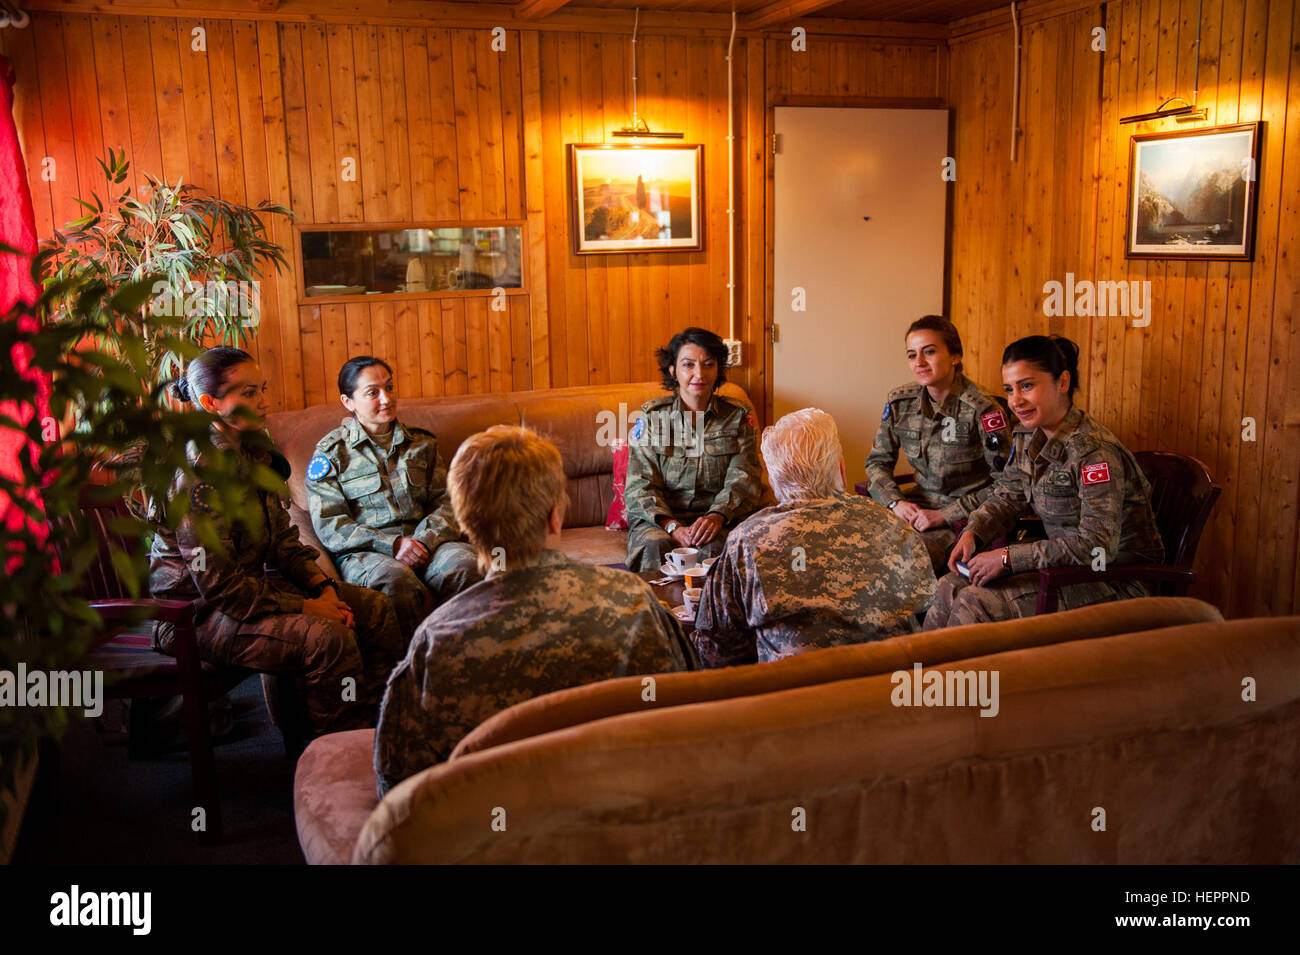 U.S. Army Brig. Gen. Giselle Wilz, NATO Headquarters Sarajevo commander, speaks with female officers of the Turkish Land Forces during a mentoring session at Camp Butmir, Bosnia and Herzegovina, April 7, 2016. Wilz discussed cultural differences, women in the military and gave advice on how to be an effective leader. Wilz plans on hosting more mentoring sessions with militaries of other nations. (U.S. Air Force photo by Staff Sgt. Clayton Lenhardt/Released) 2509286 Female officers of the Turkish Land Forces at Camp Butmir, Bosnia and Herzegovina 2016 Stock Photo